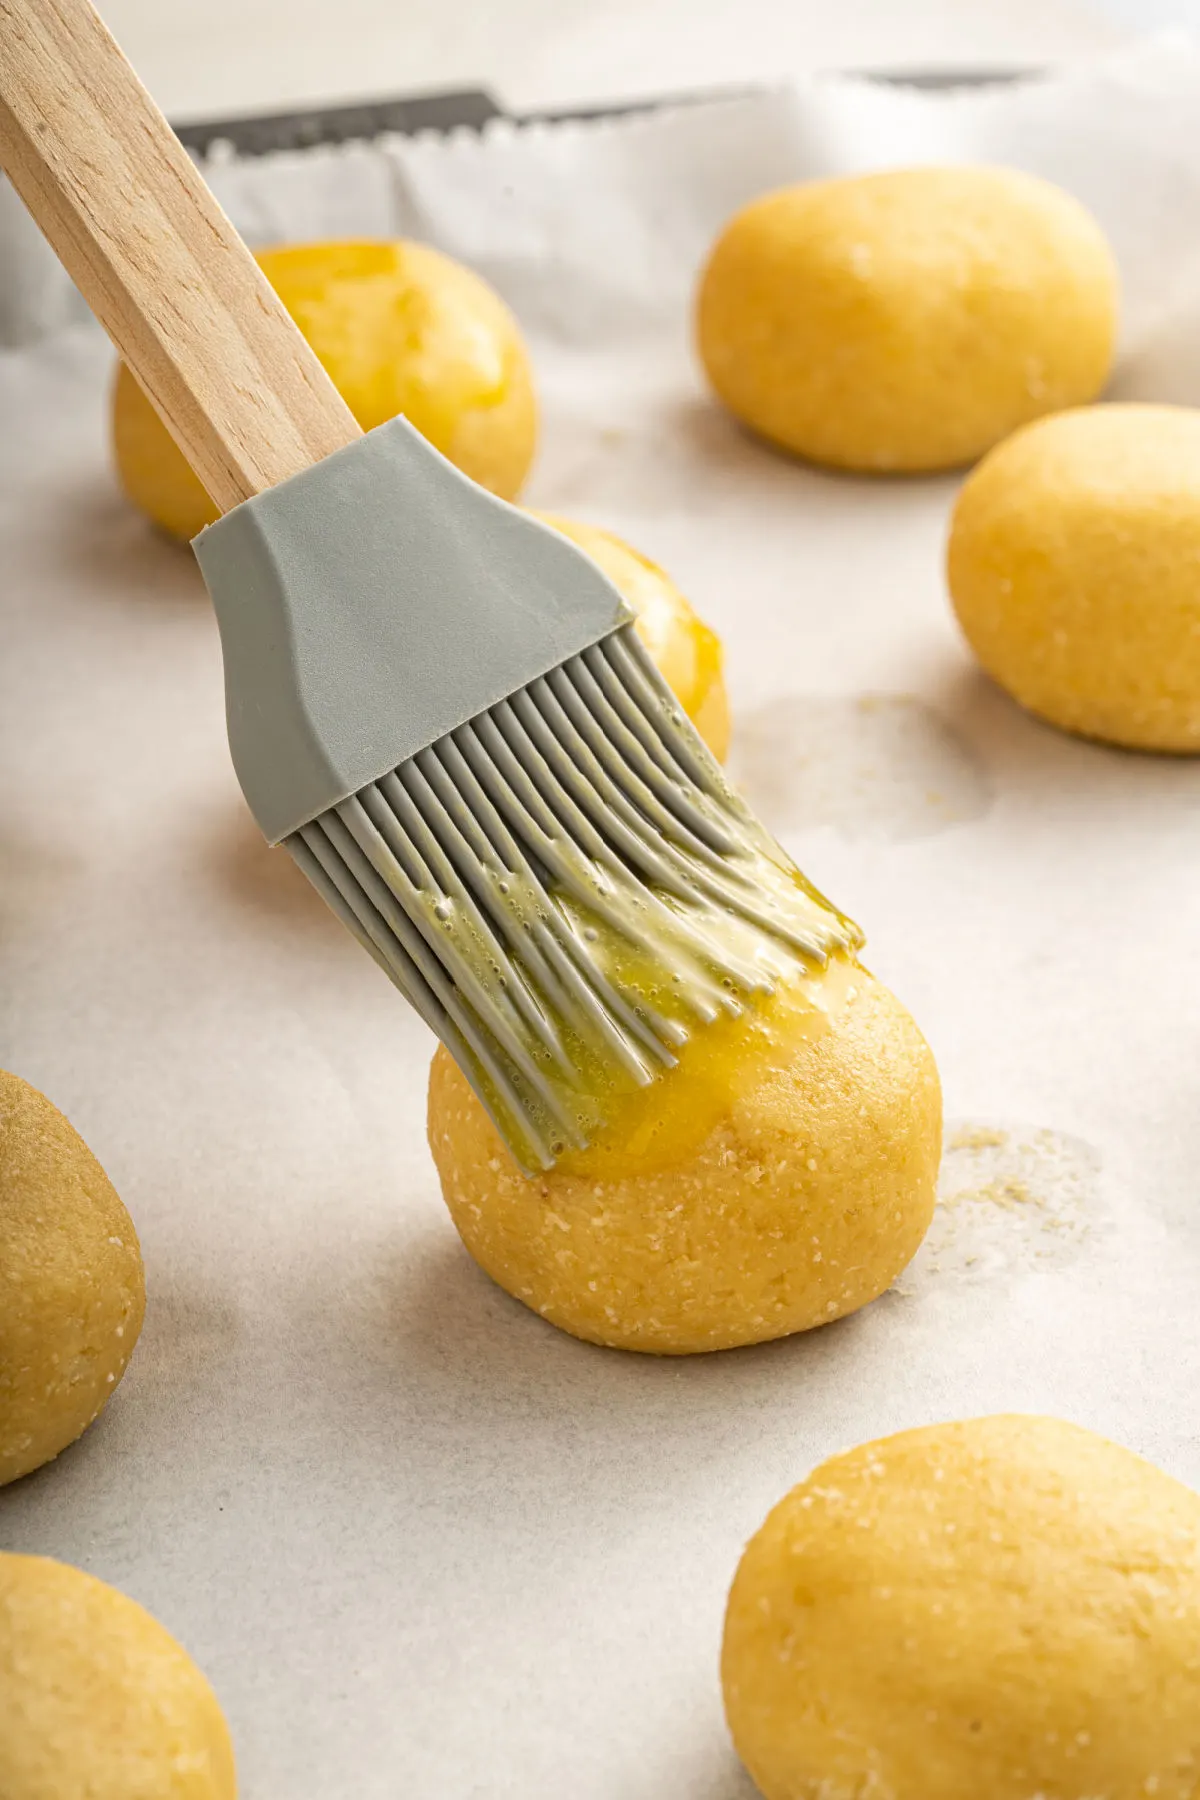 Unbaked buns being brushed with egg yolk.